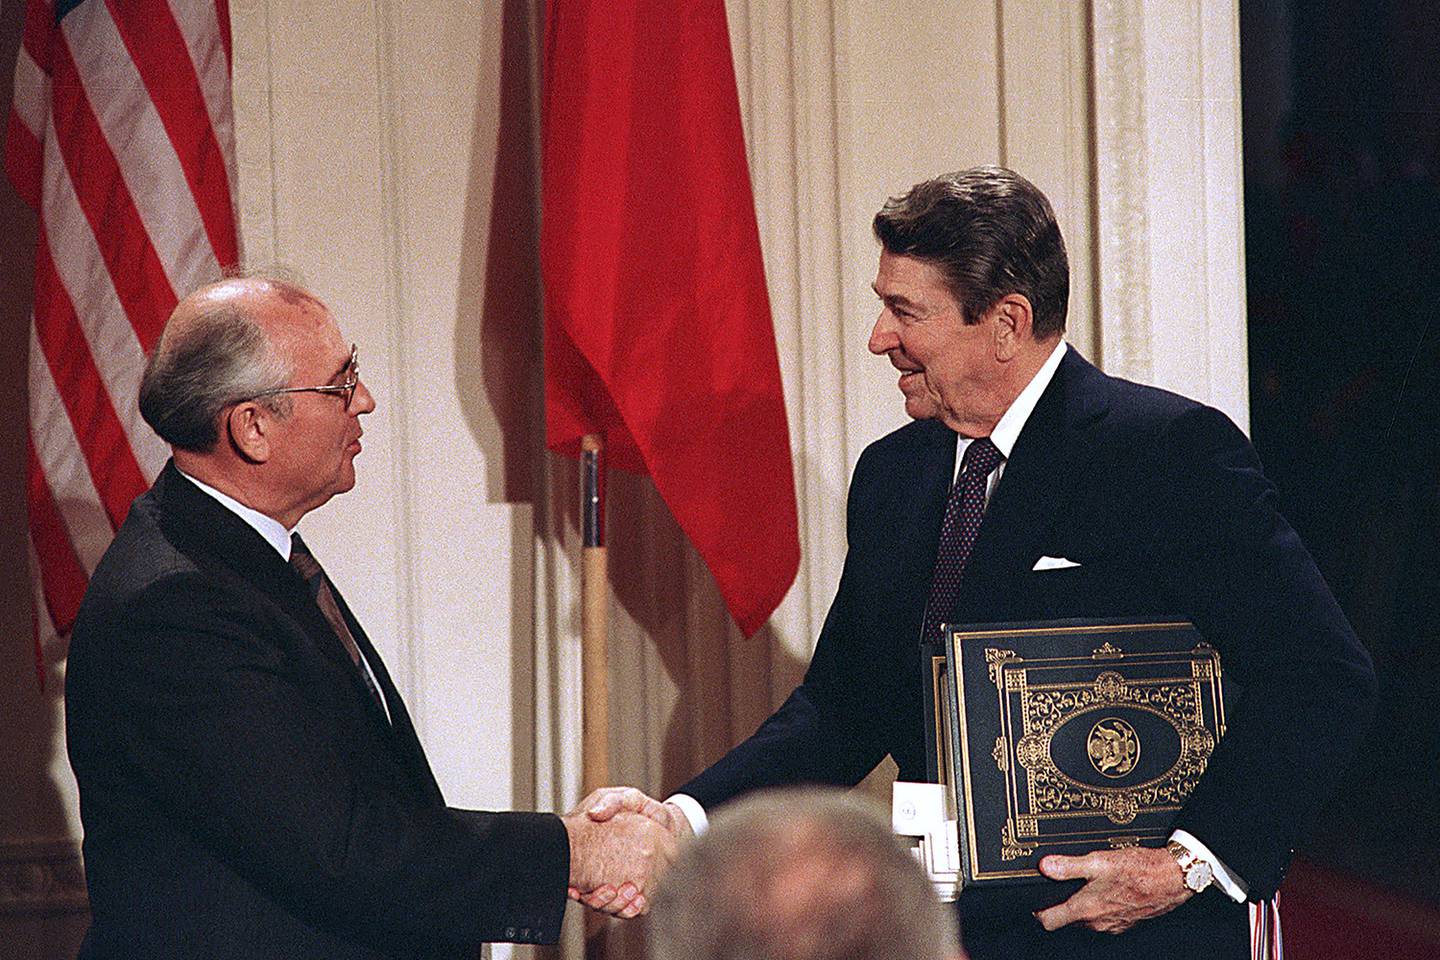 In this Dec. 8, 1987, file photo, President Ronald Reagan, right, shakes hands with Soviet leader Mikhail Gorbachev after the two leaders signed the Intermediate Range Nuclear Forces Treaty to eliminate intermediate-range missiles during a ceremony in the White House East Room in Washington.